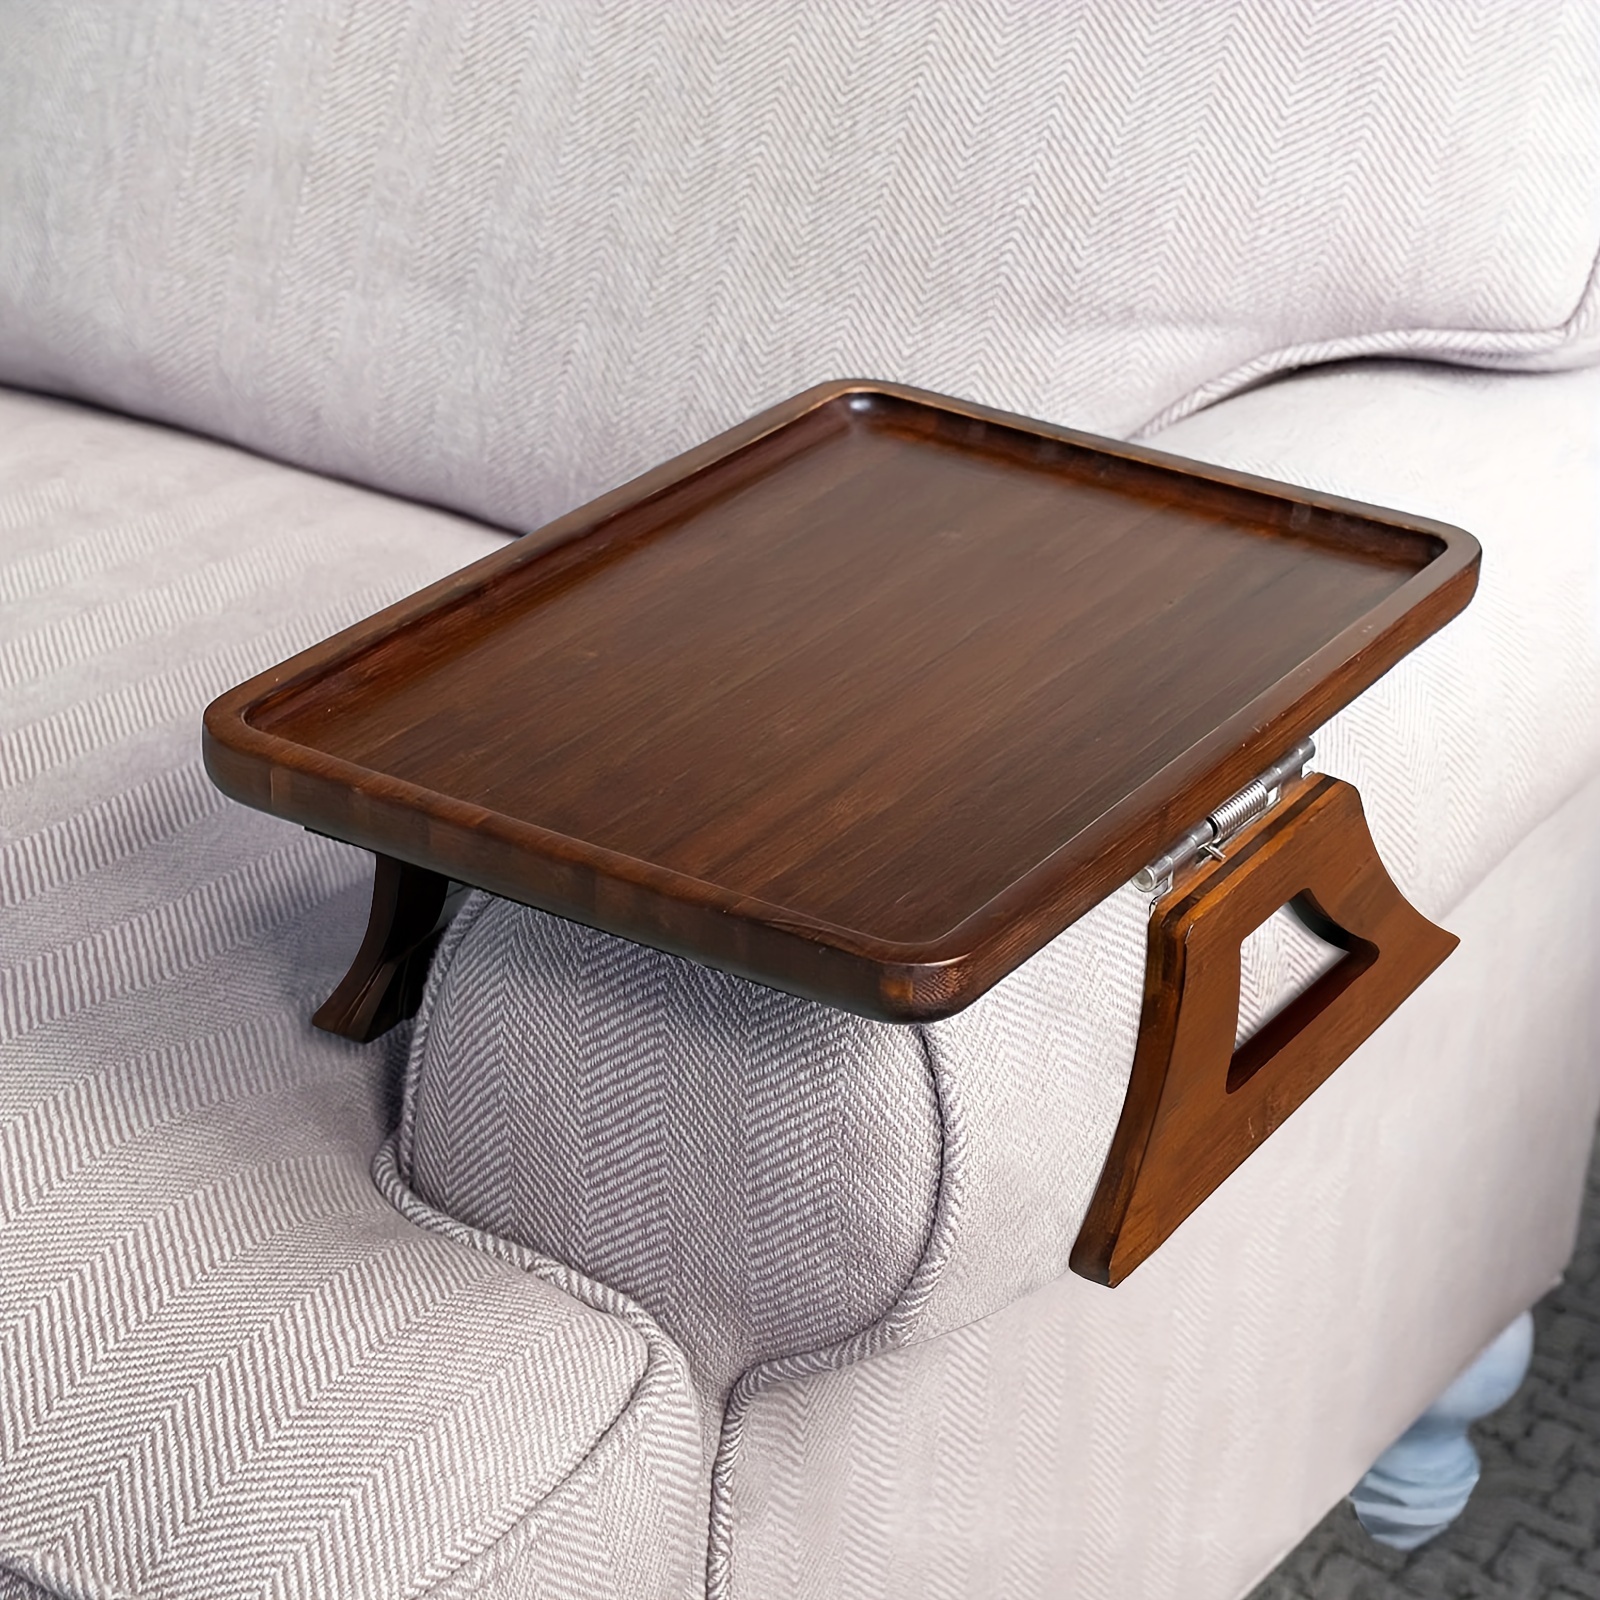 Acacia Wood Sofa Armrest Tray Sofa Arm Tray Table Clip Couch Arm Table for  Wide Couches Wooden Side Tables for Eating